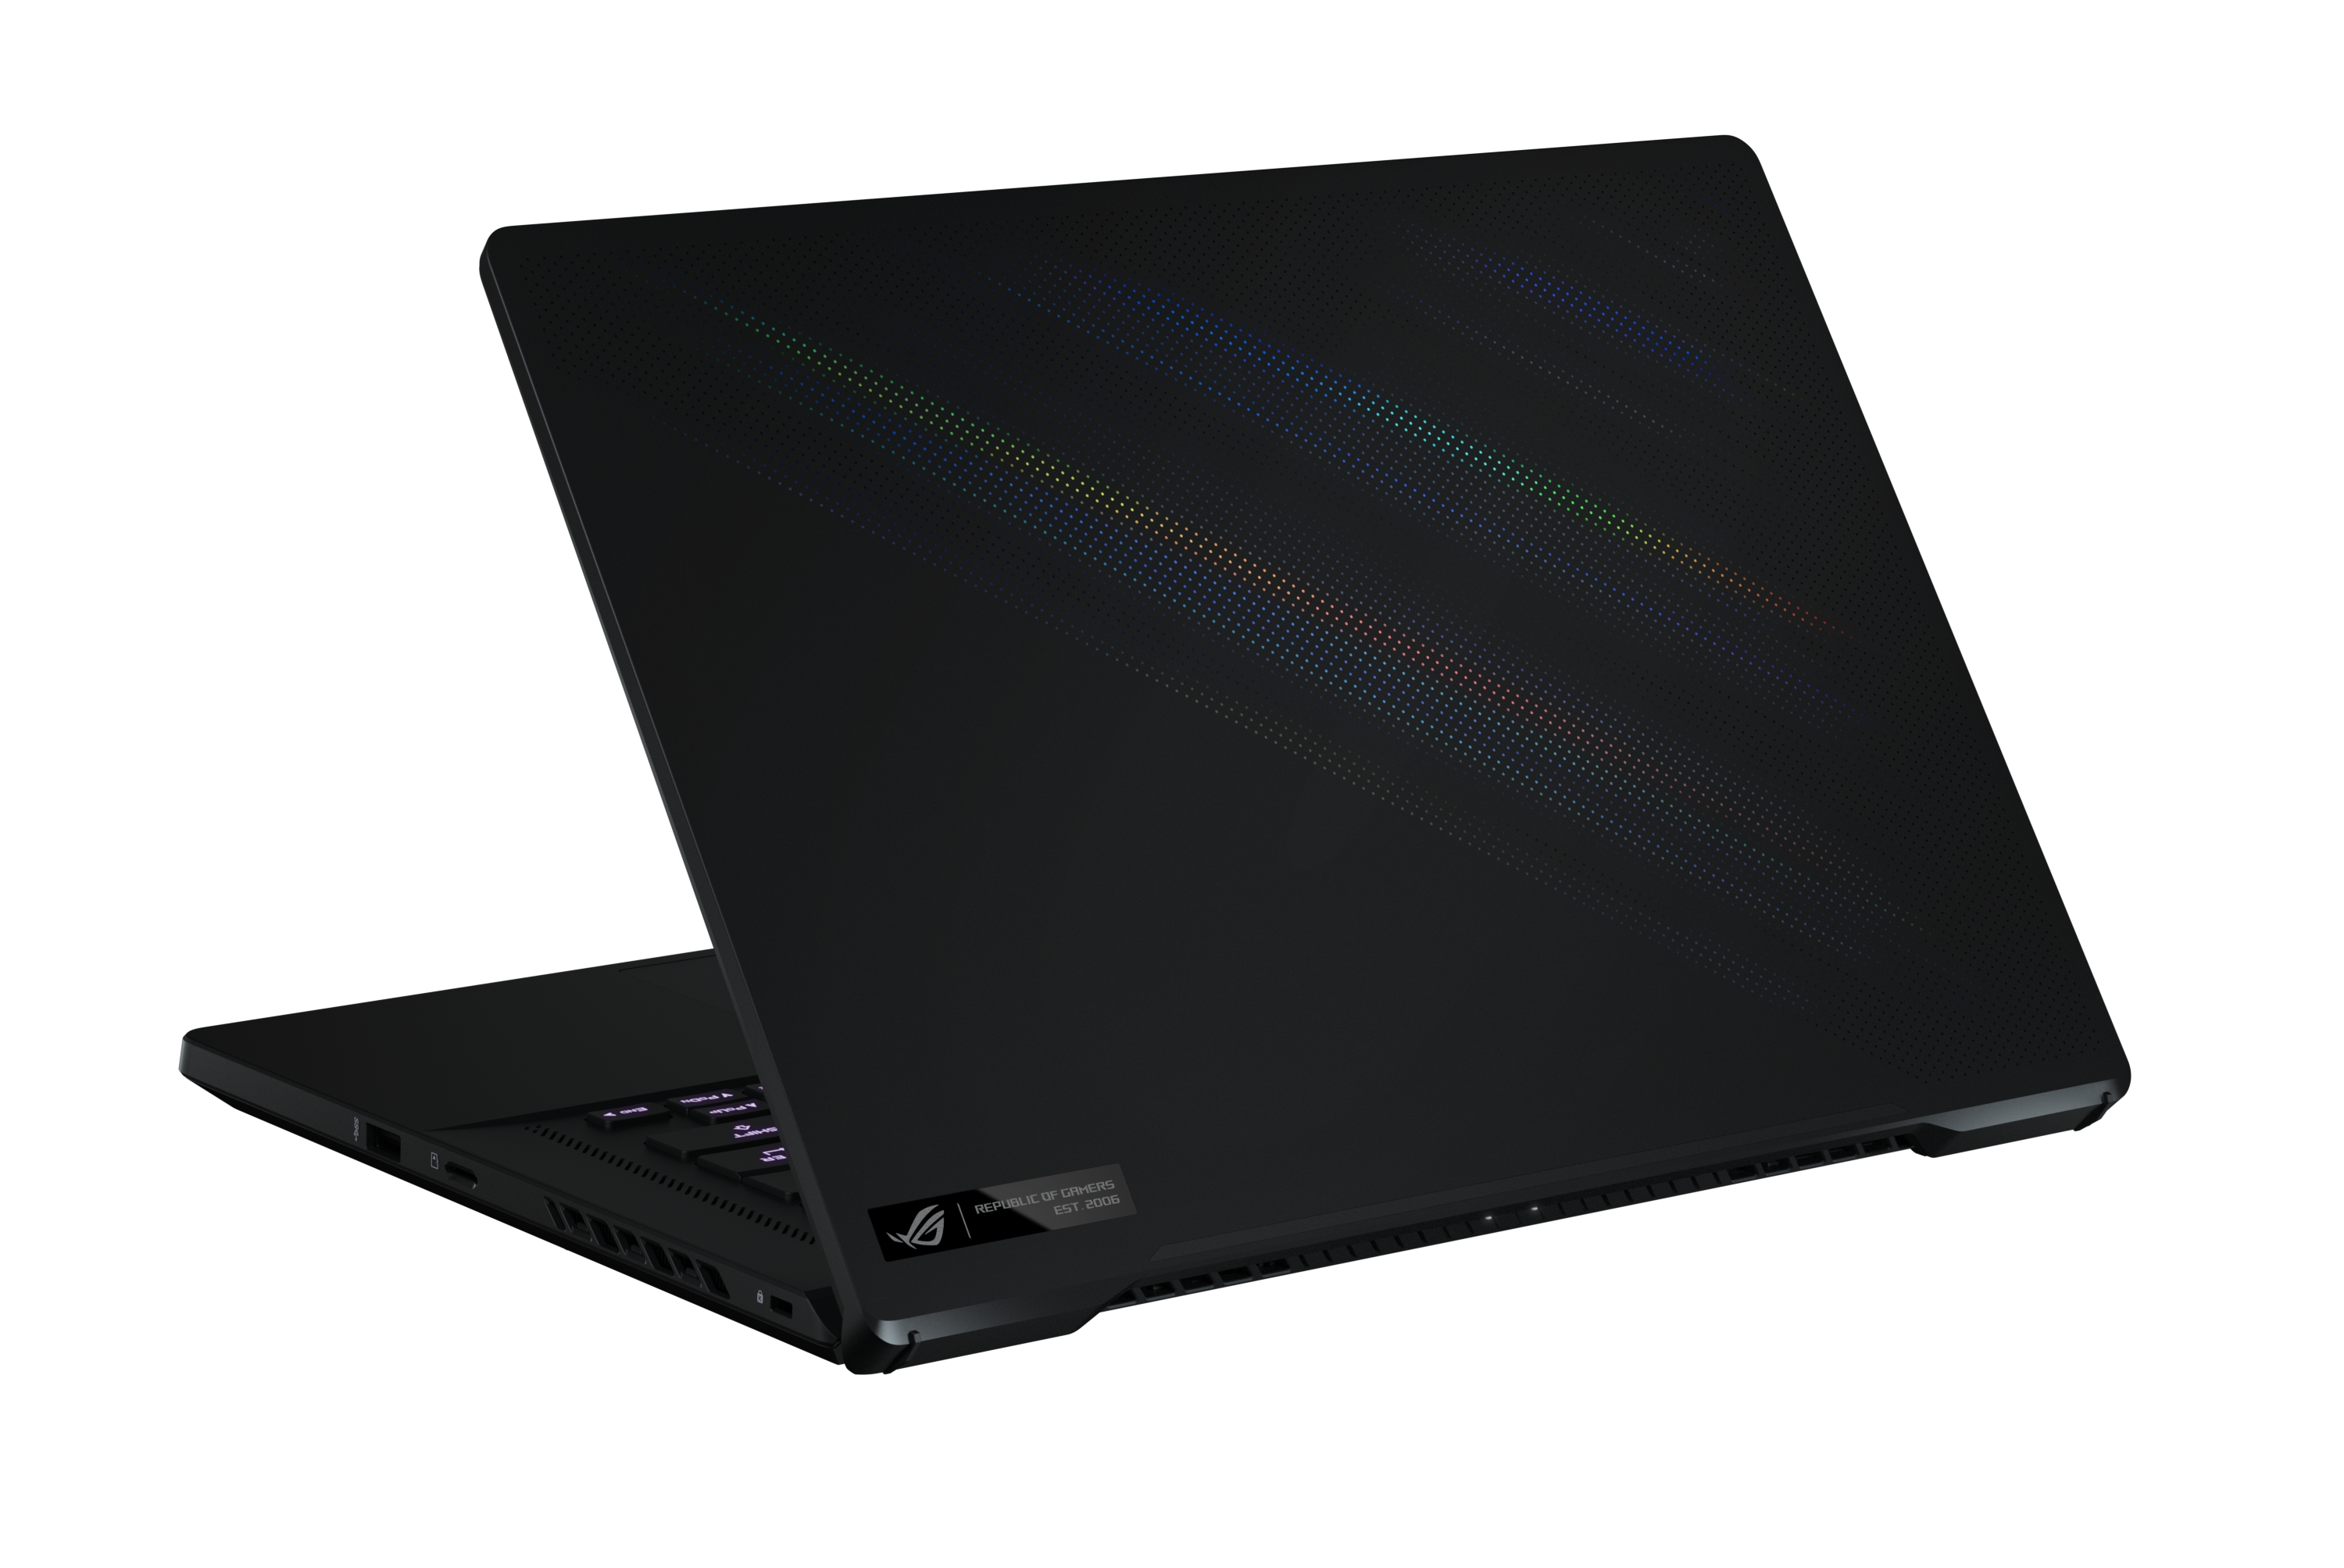 ASUS has announced Zephyrus M16 with 16inch screen and Intel Core i9